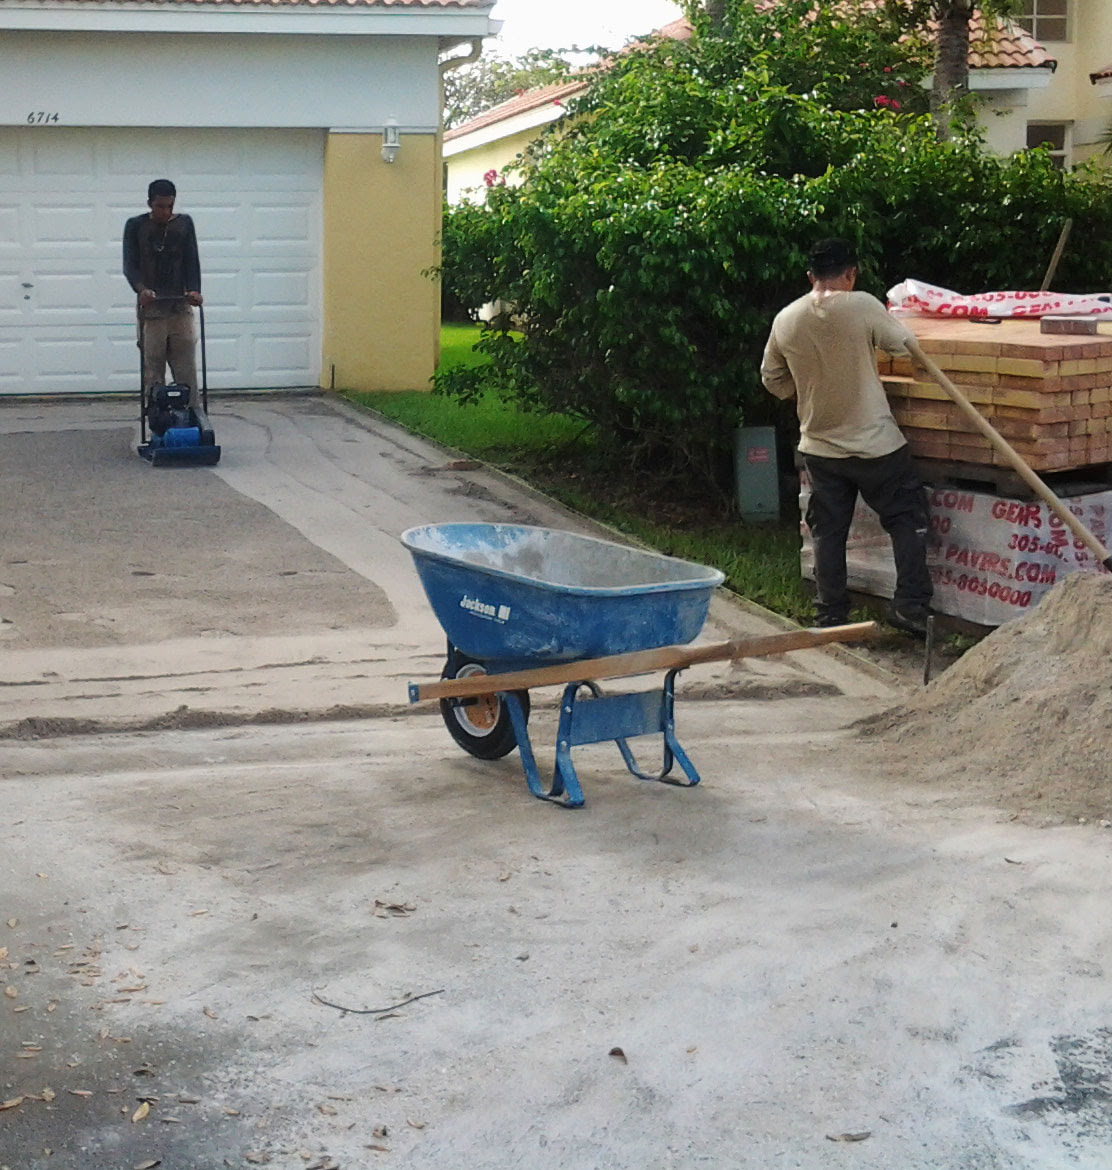  people with sandand pavers on a driveway